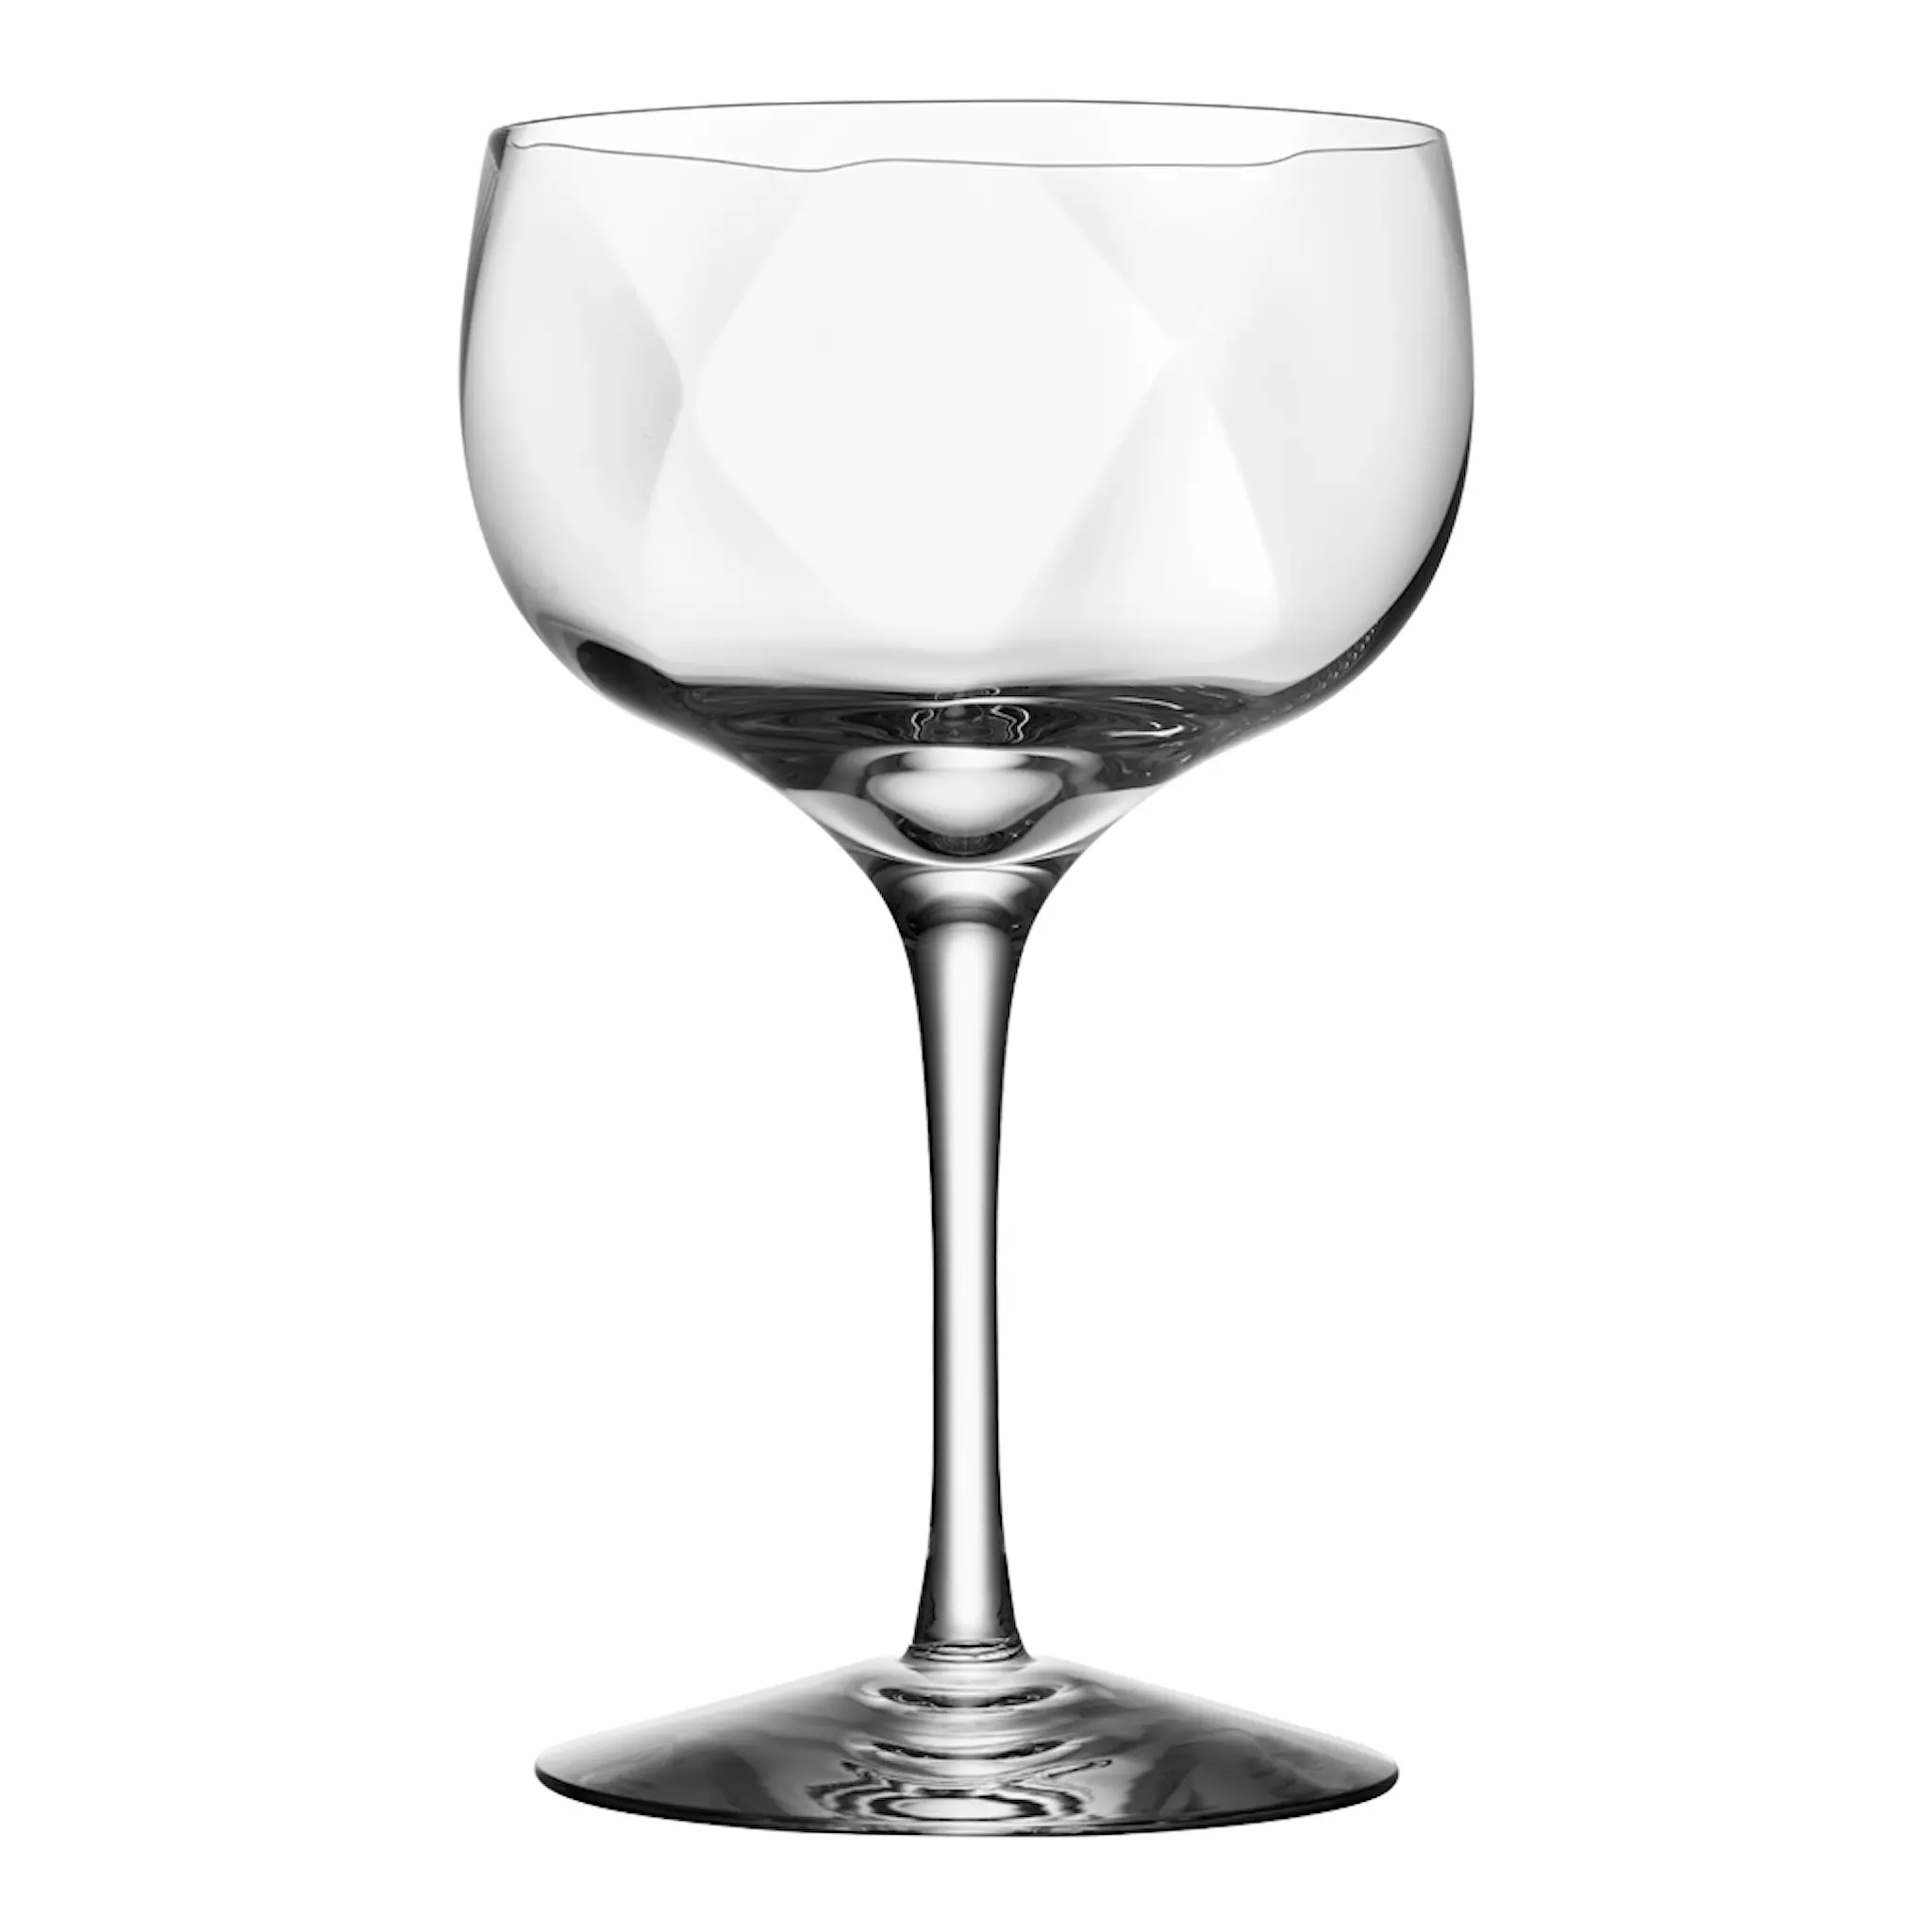 Orrefors Chateau coupe champagneglass 35 cl